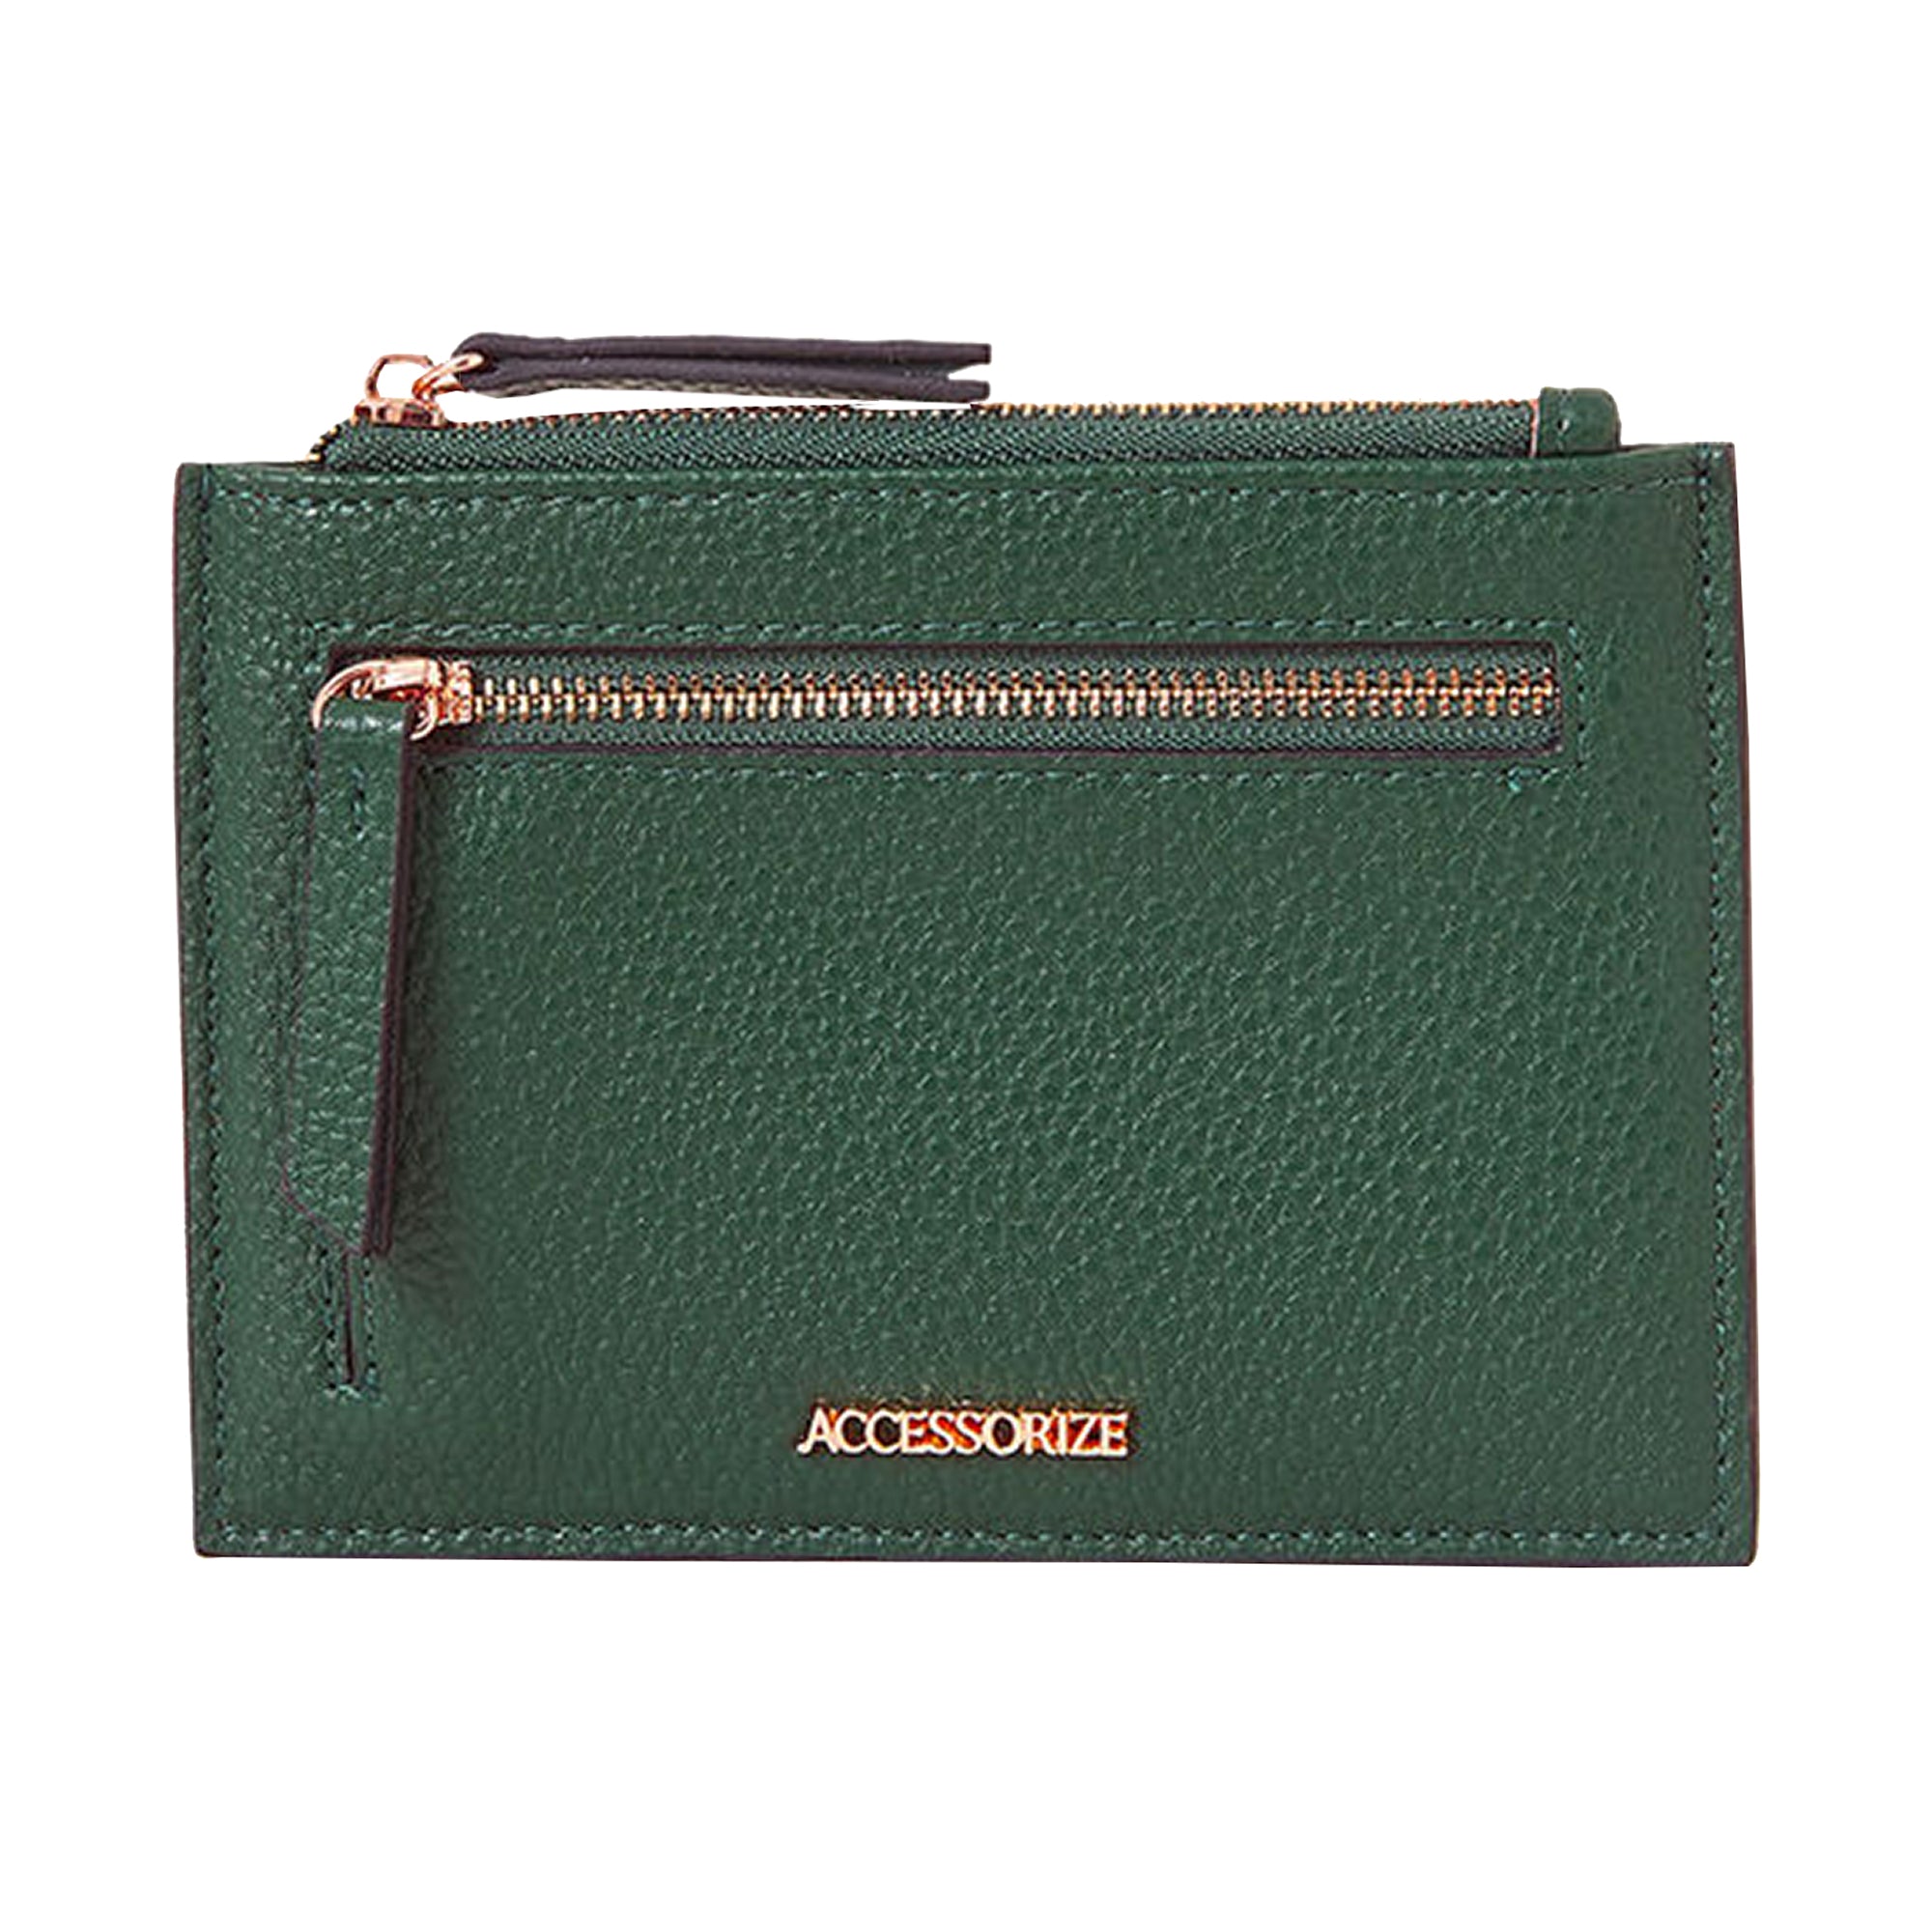 Accessorize London Women's Green Large Functional Card Holder